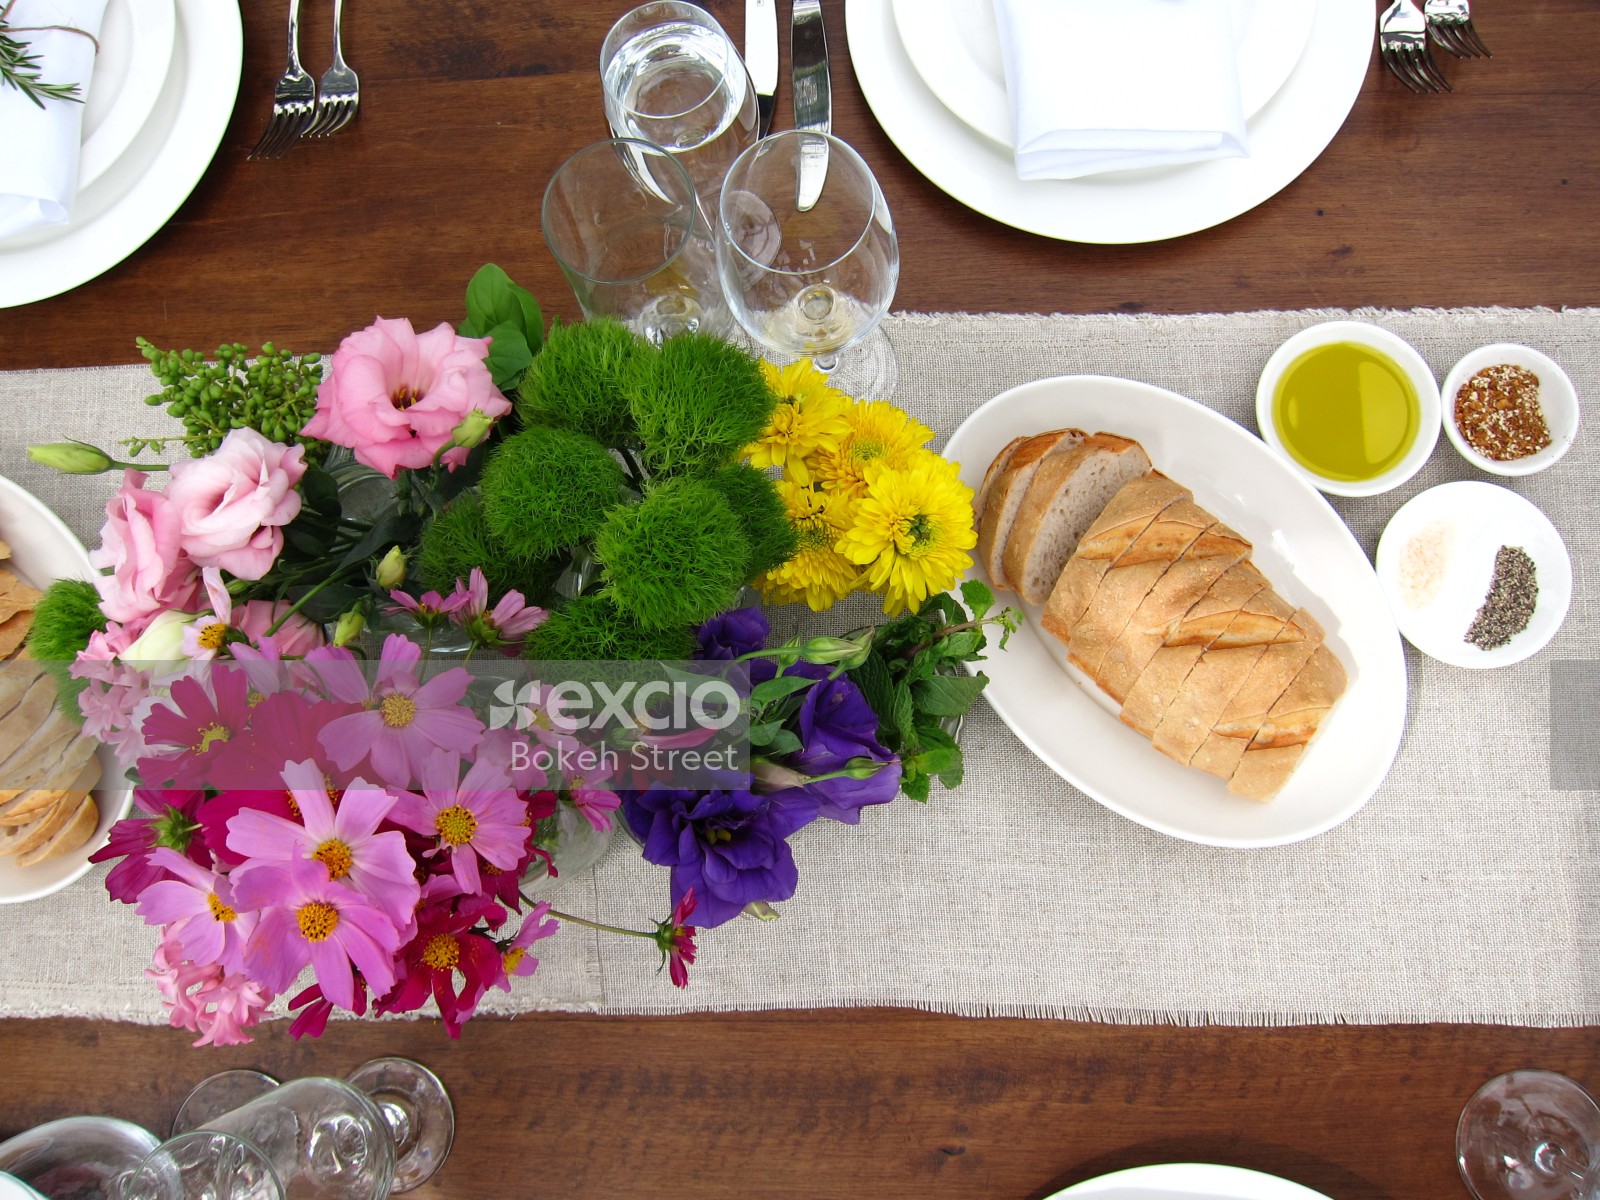 Flower vase and bread at an outdoor table setting